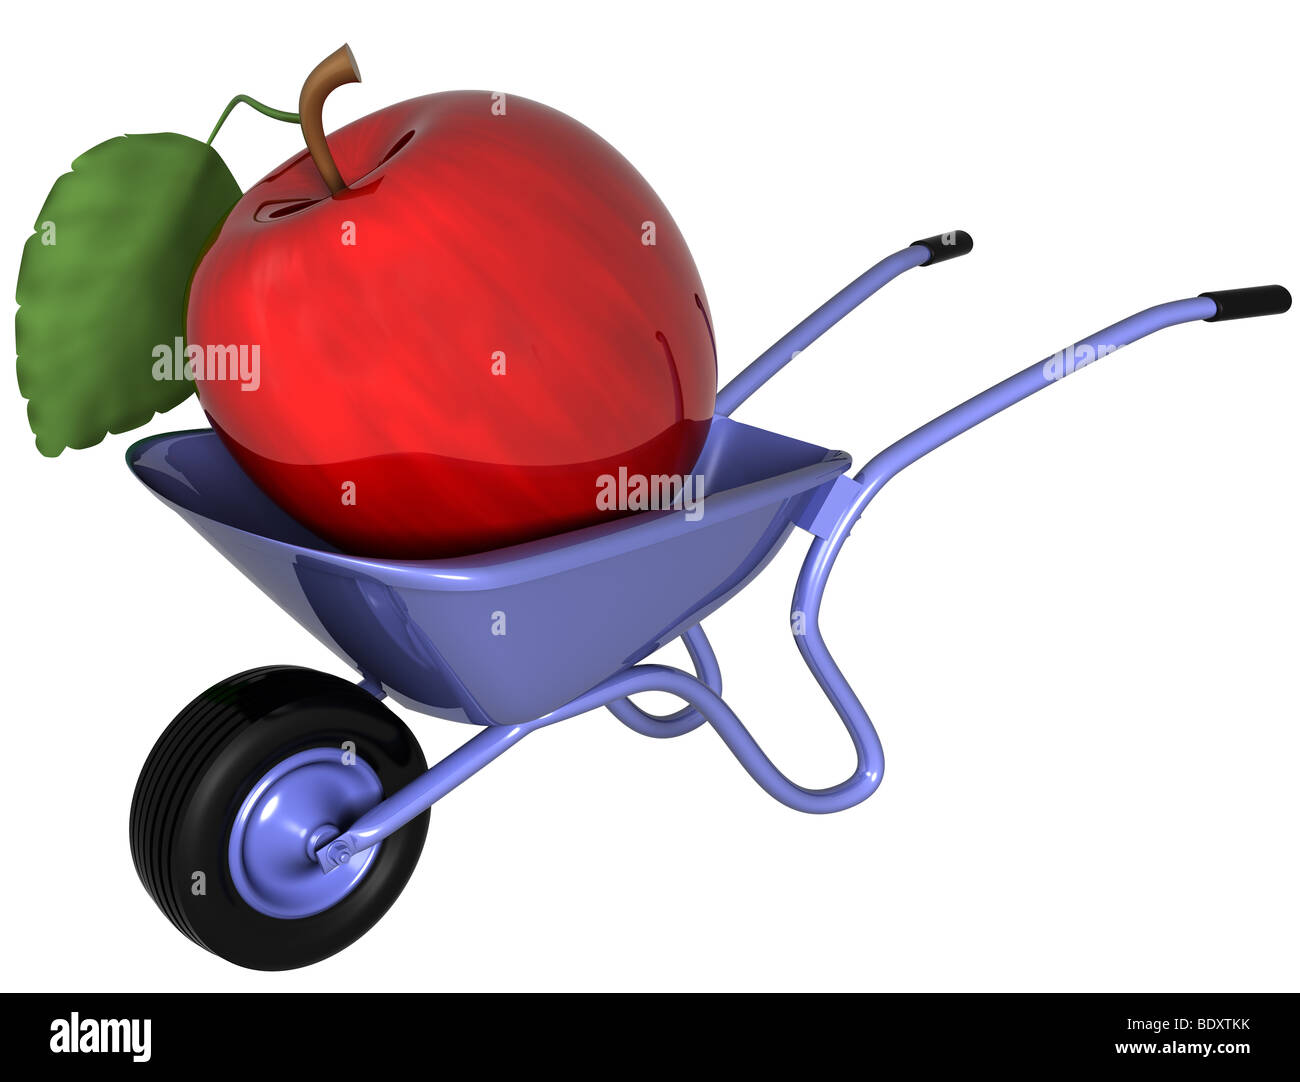 Isolated illustration of a giant apple sitting in a wheelbarrow Stock Photo